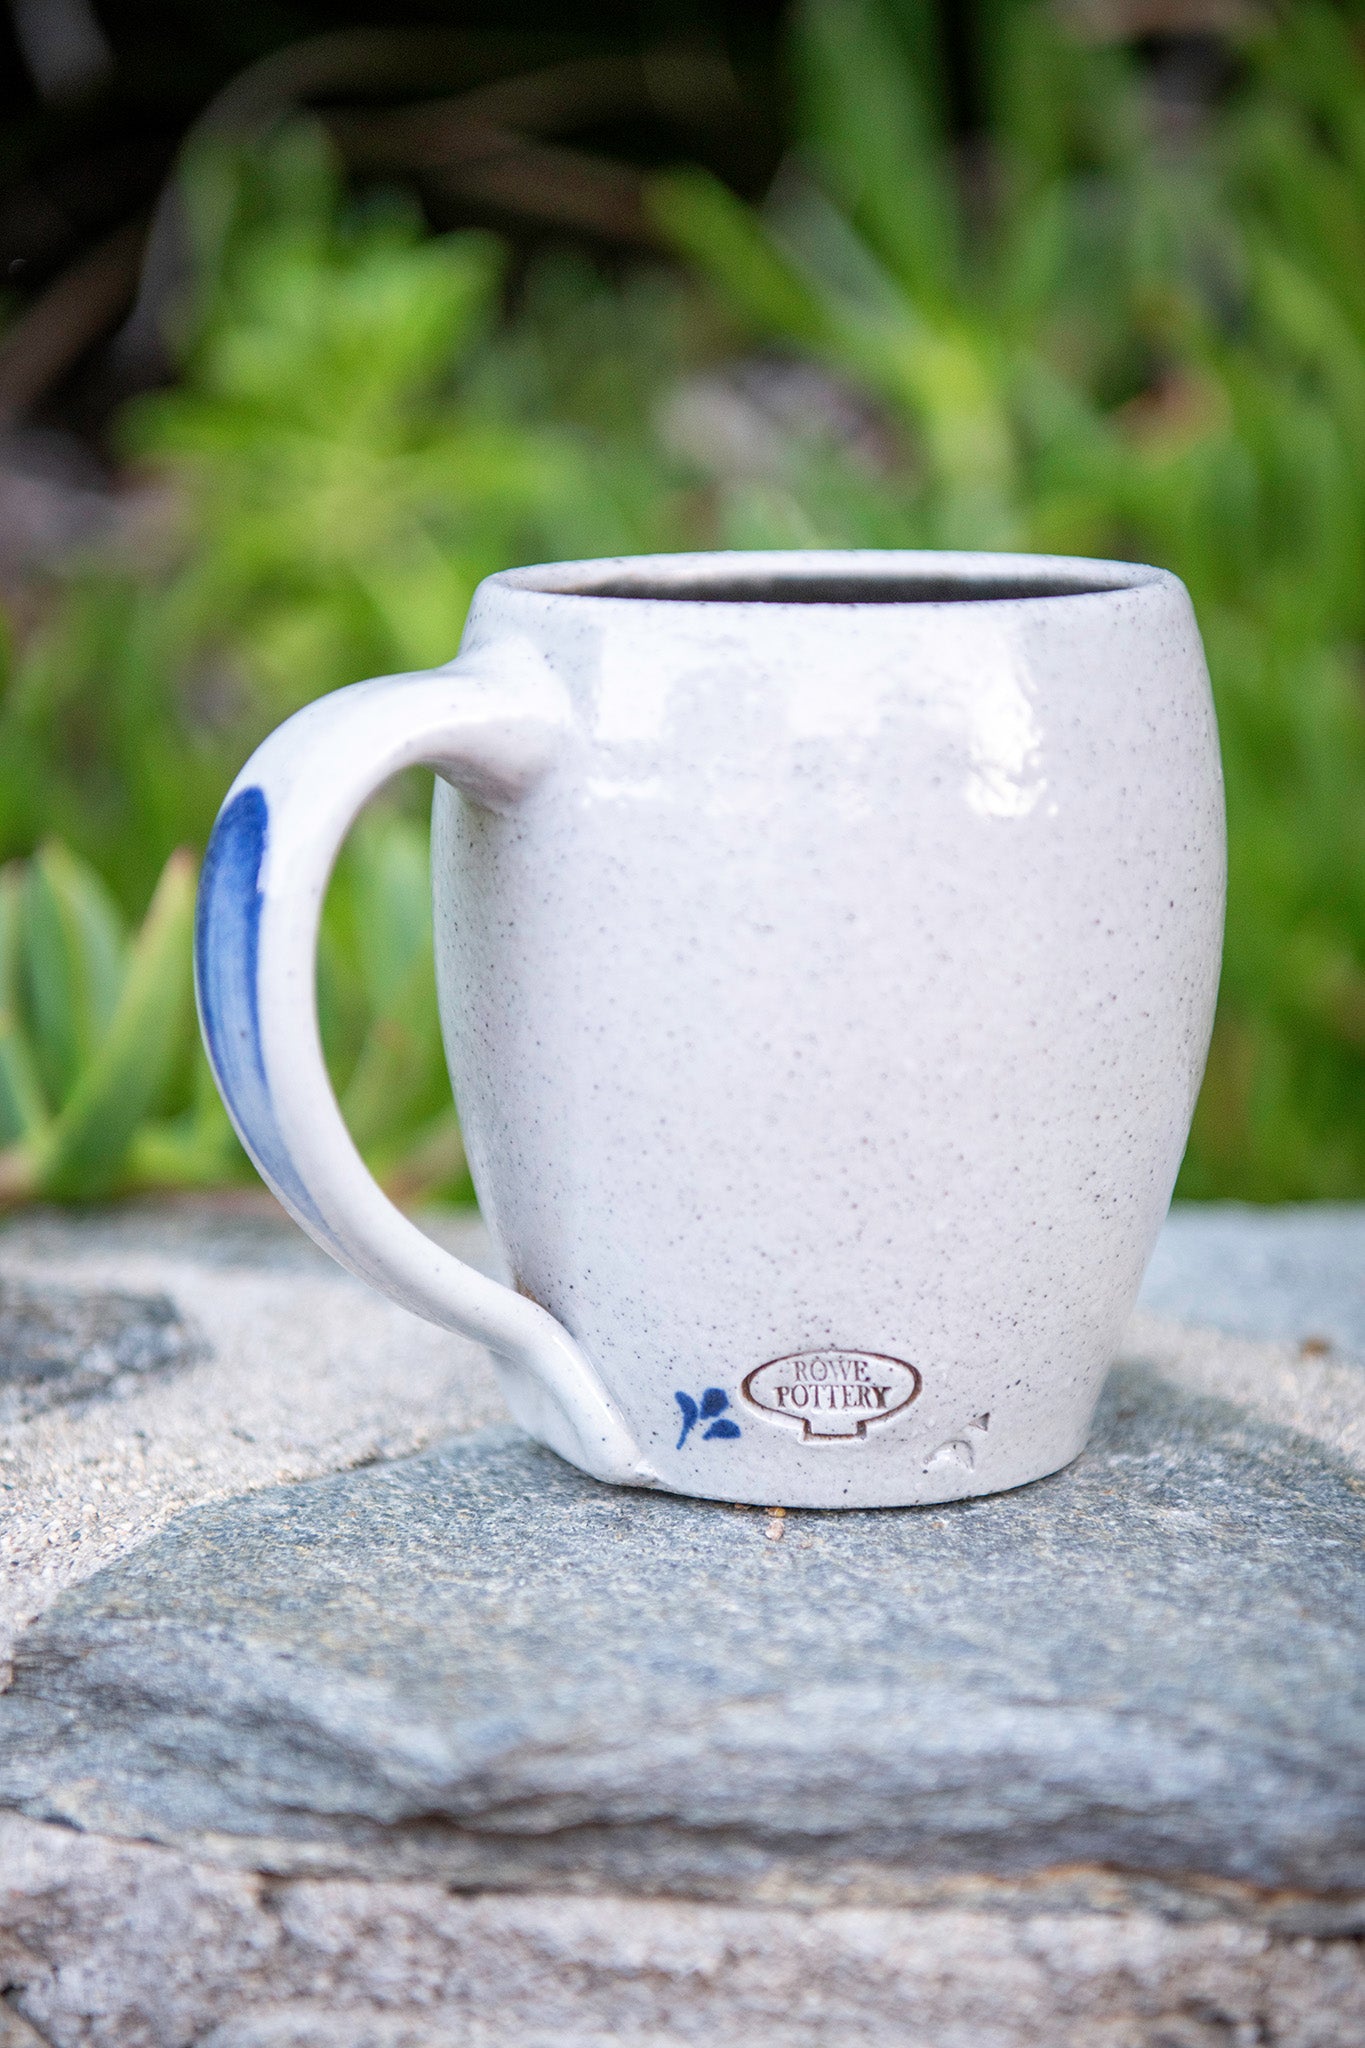 Limited-Edition '50 Years on the Prairie' Cafe Mug - Covered Wagon